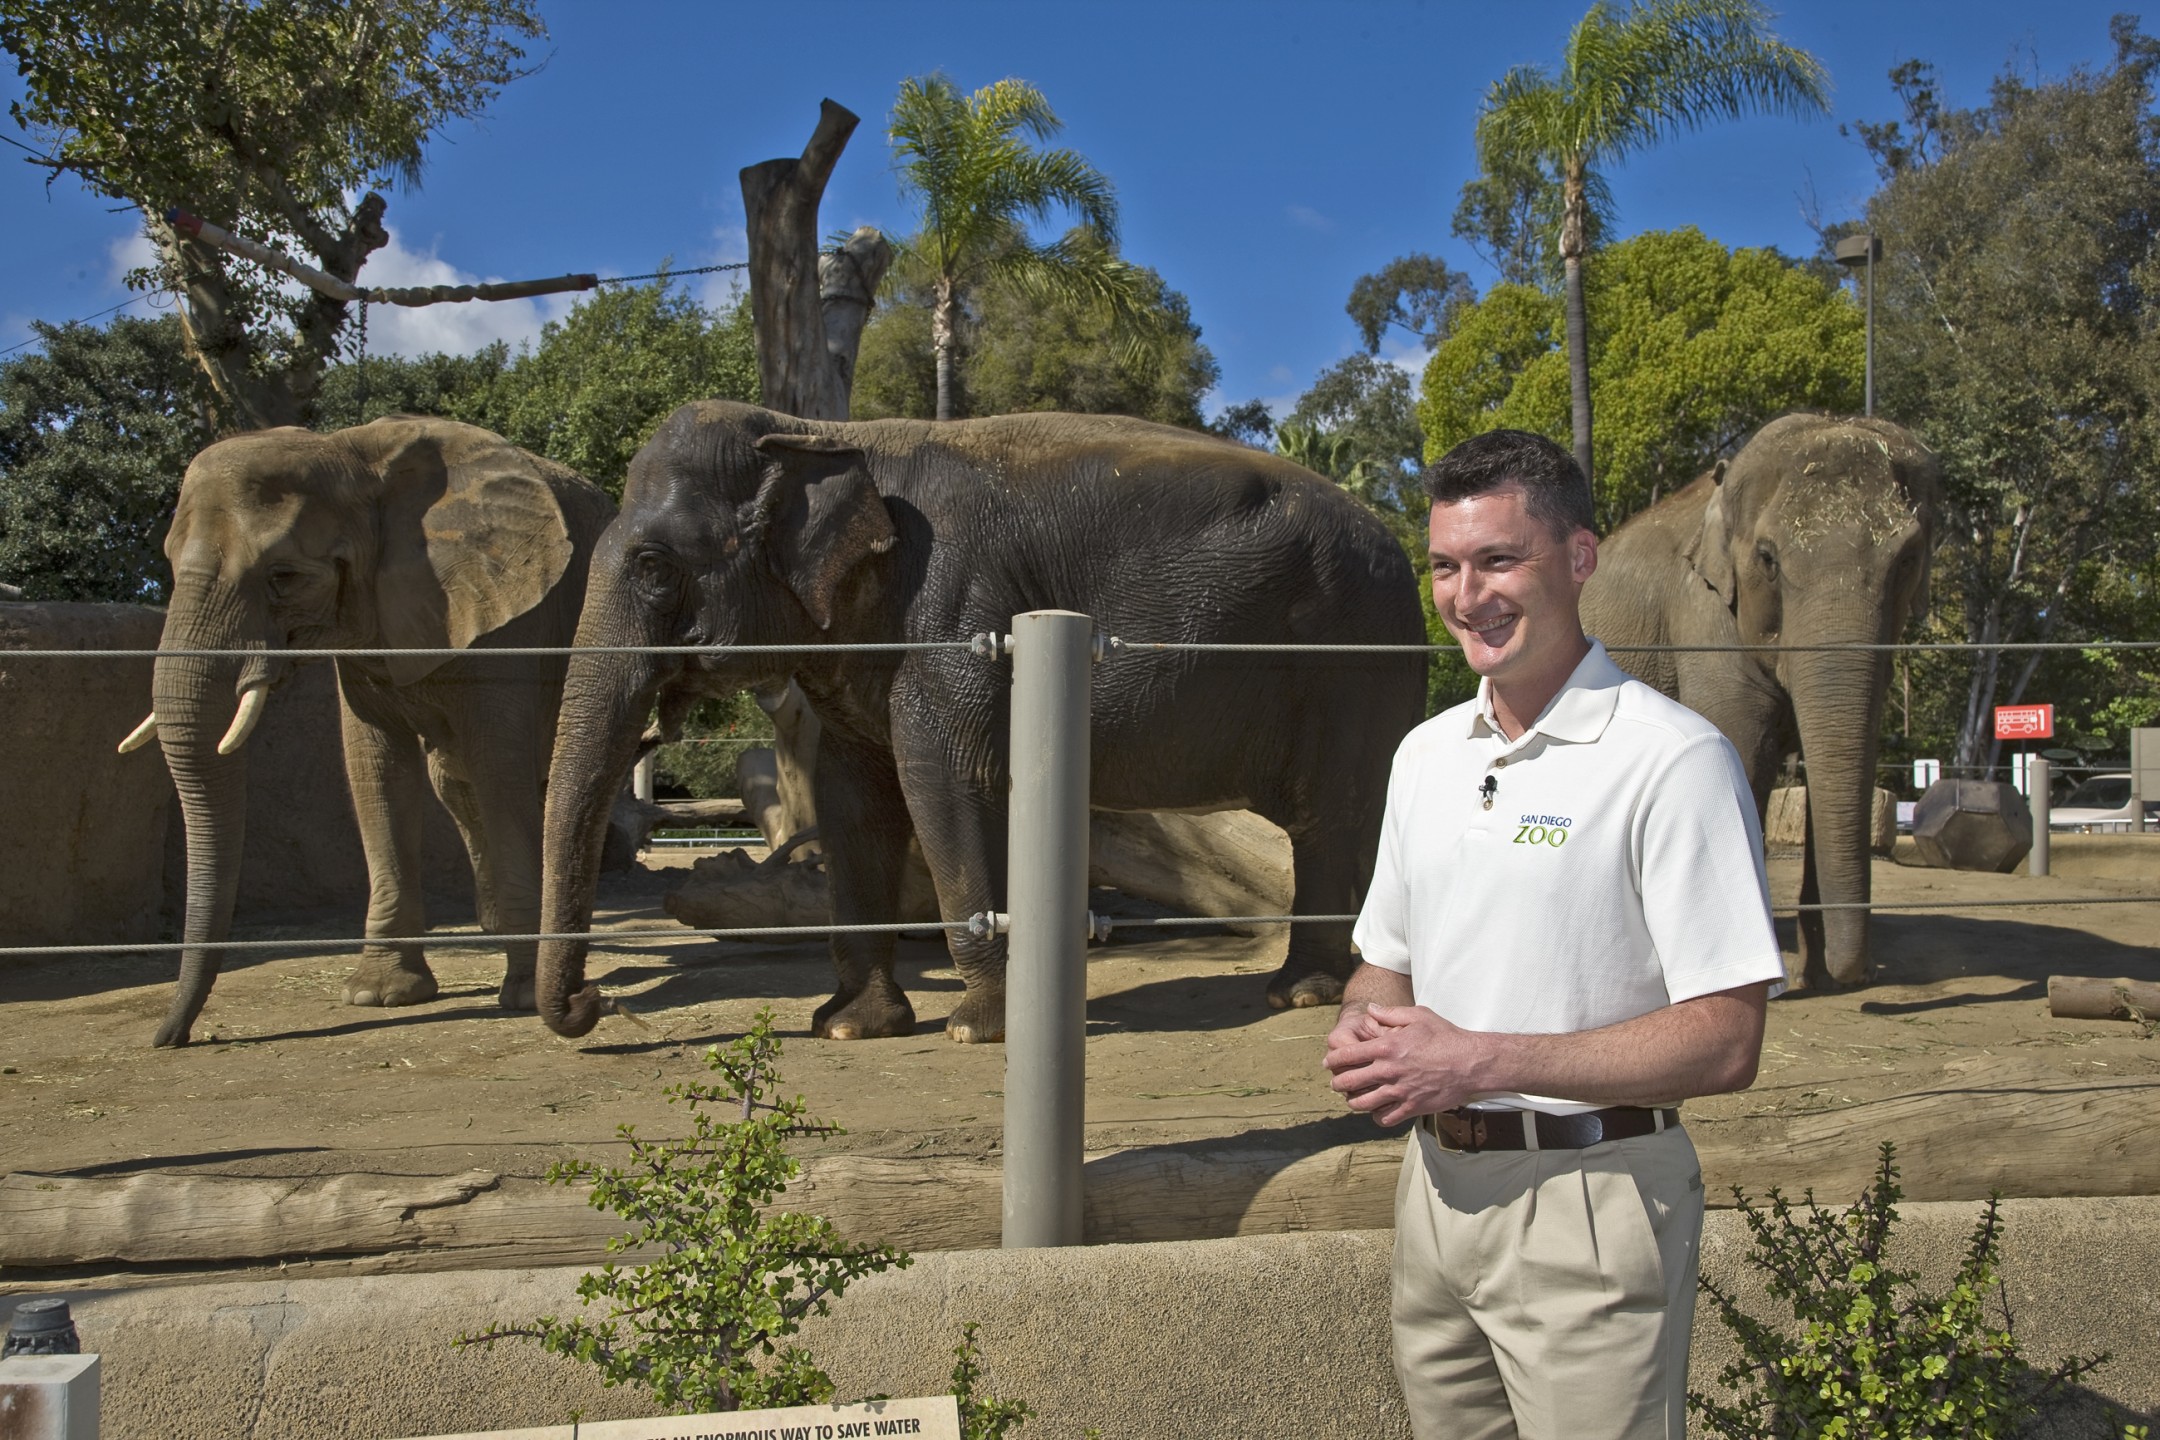 As construction for Harry and Grace Steele Elephant Odyssey was underway, both the elephants and the San Diego Zoo found a new ambassador in Rick Schwartz. Rick was a keeper in the Children's Zoo and had a passion for wildlife conservation, and he was soon in front of the camera as the San Diego Zoo Elephant Odyssey Ambassador.